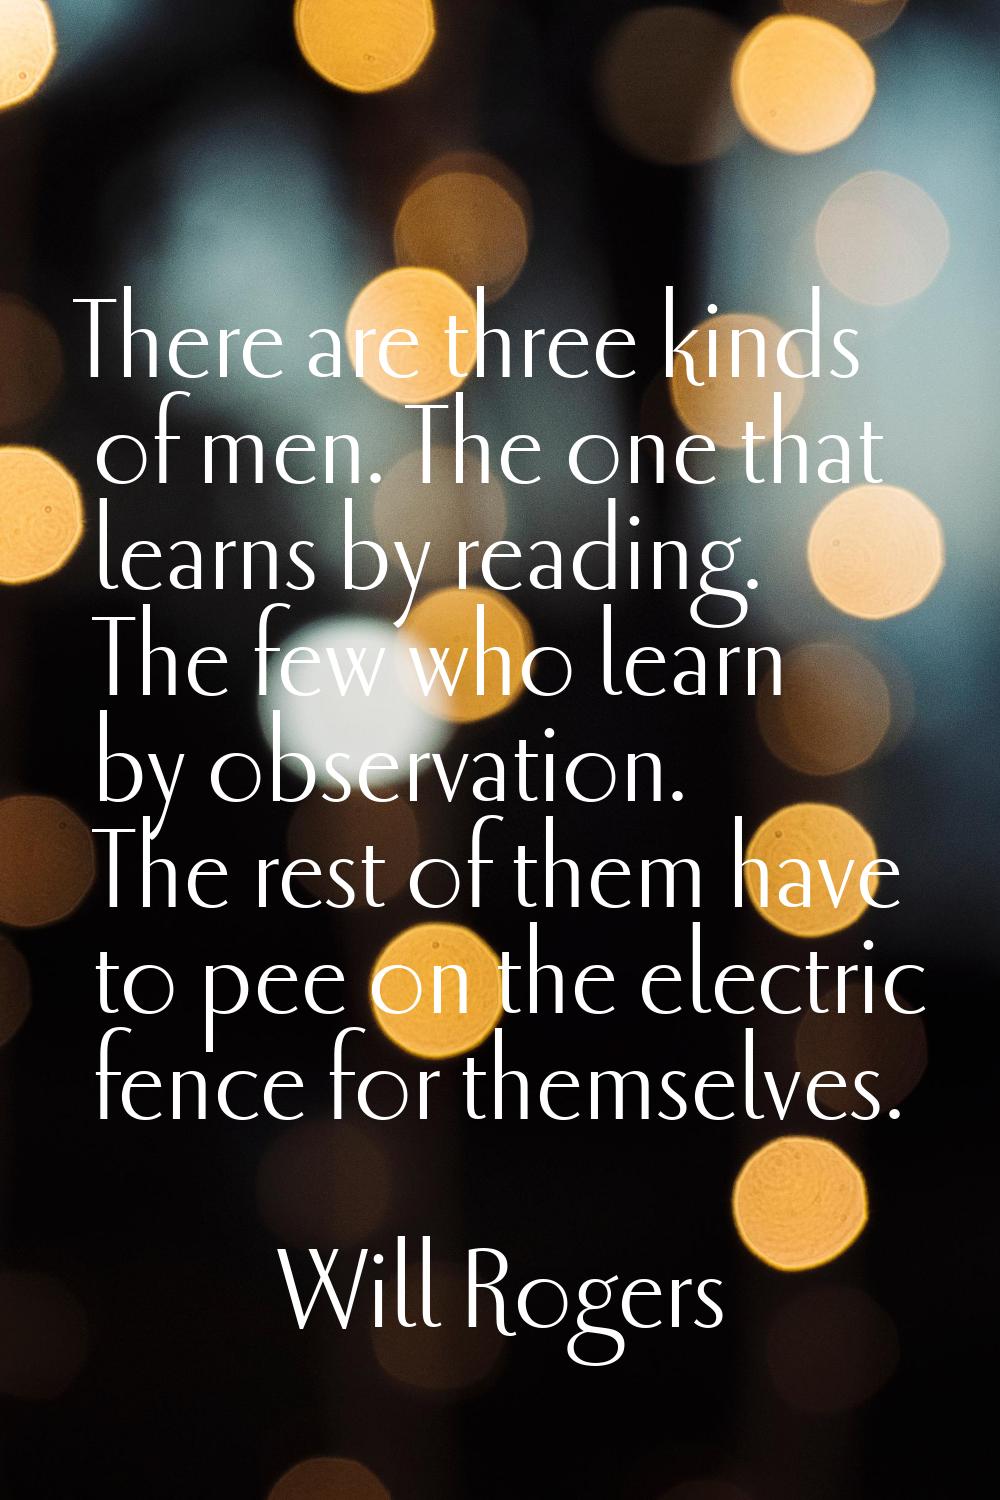 There are three kinds of men. The one that learns by reading. The few who learn by observation. The